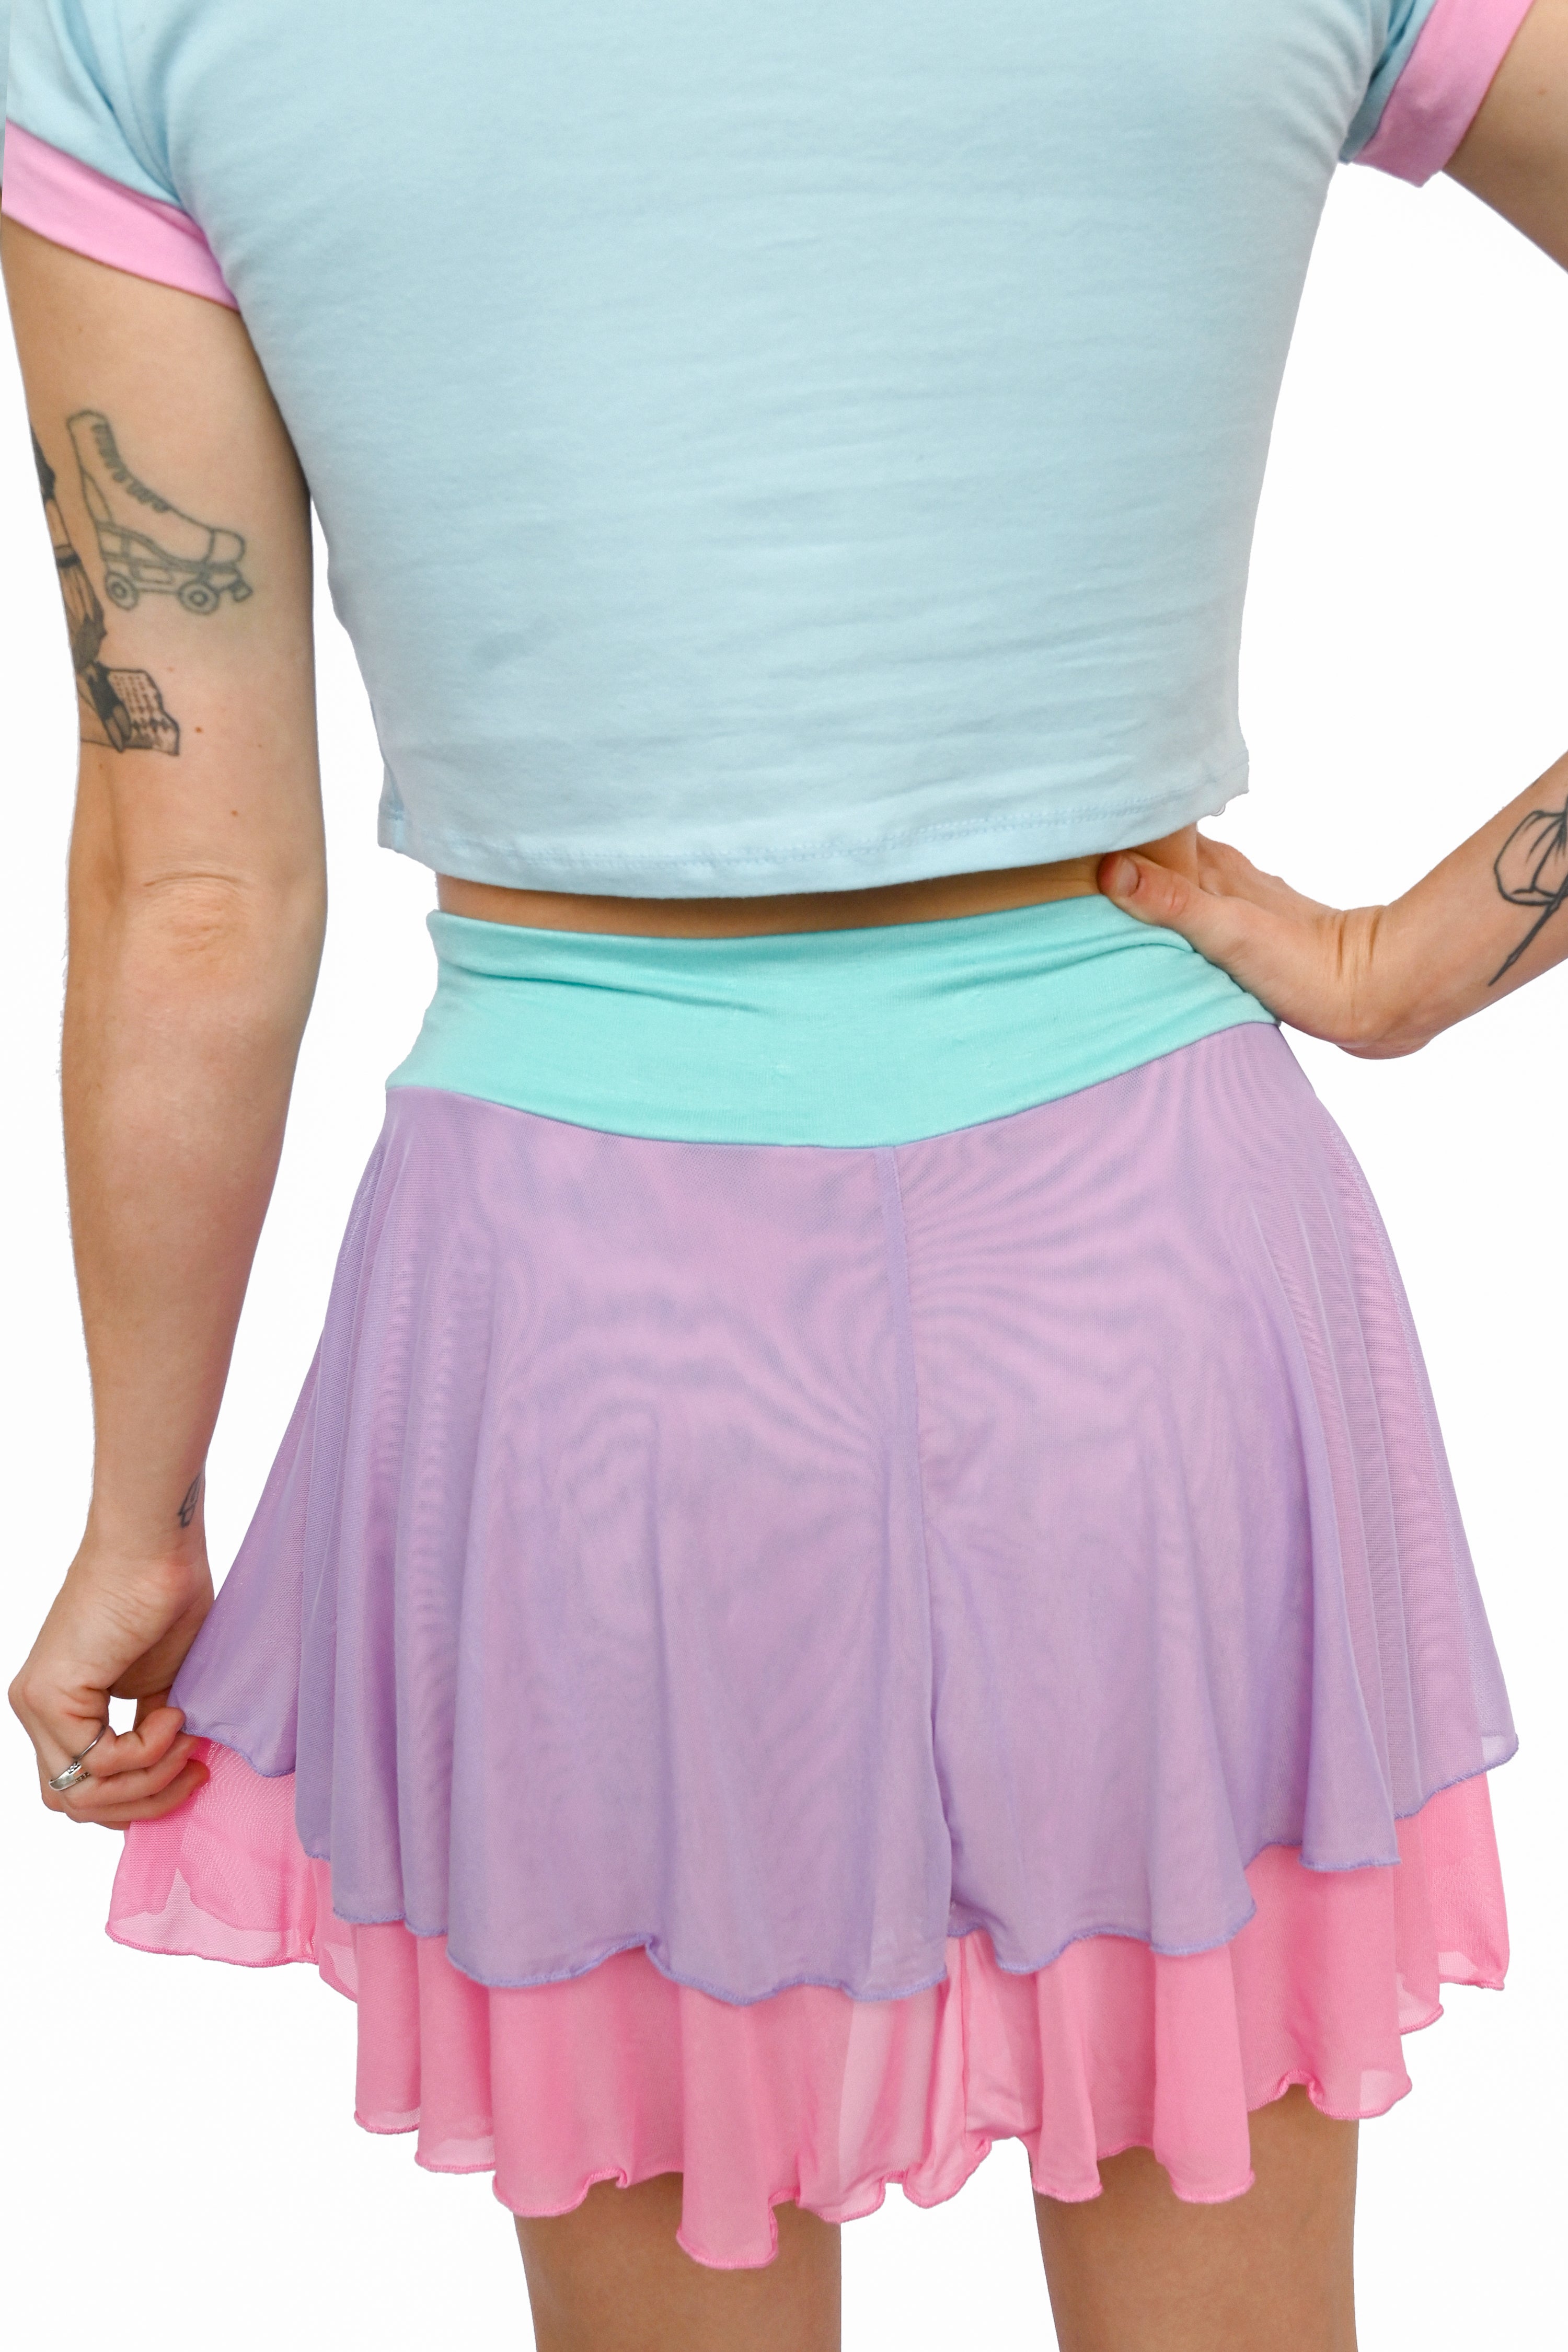 Sheer pink and purple skirt over built in mint shorts